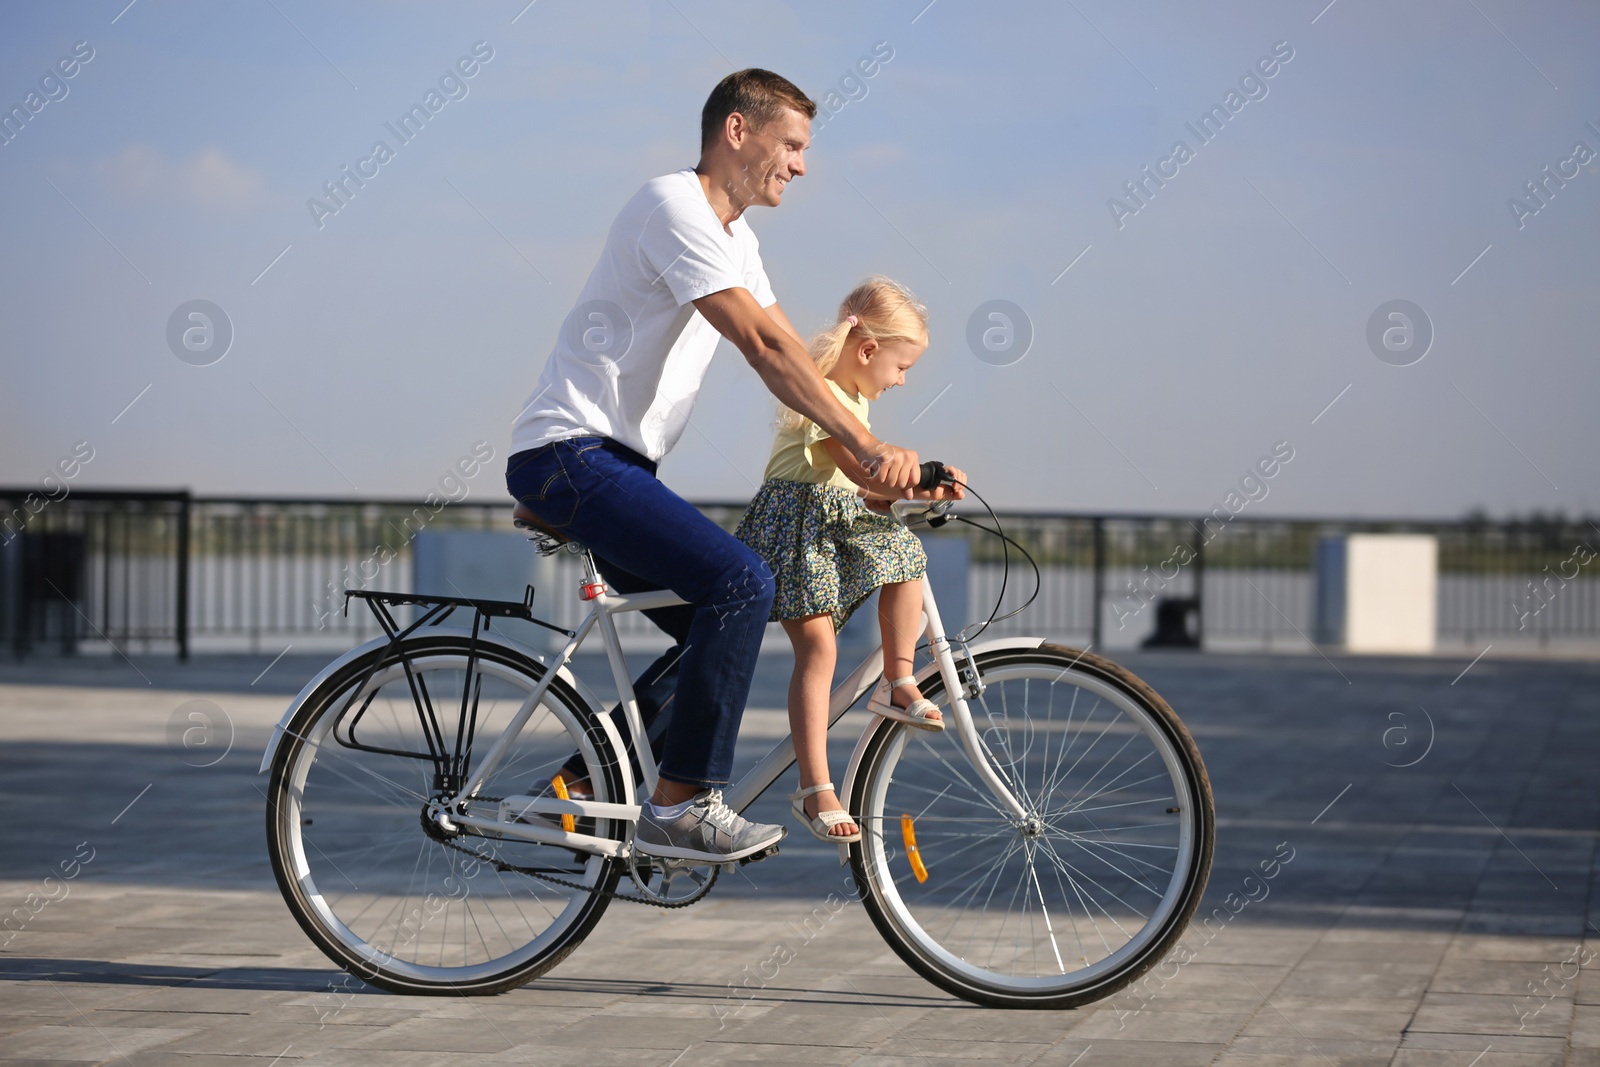 Photo of Father and daughter riding bicycle outdoors on sunny day